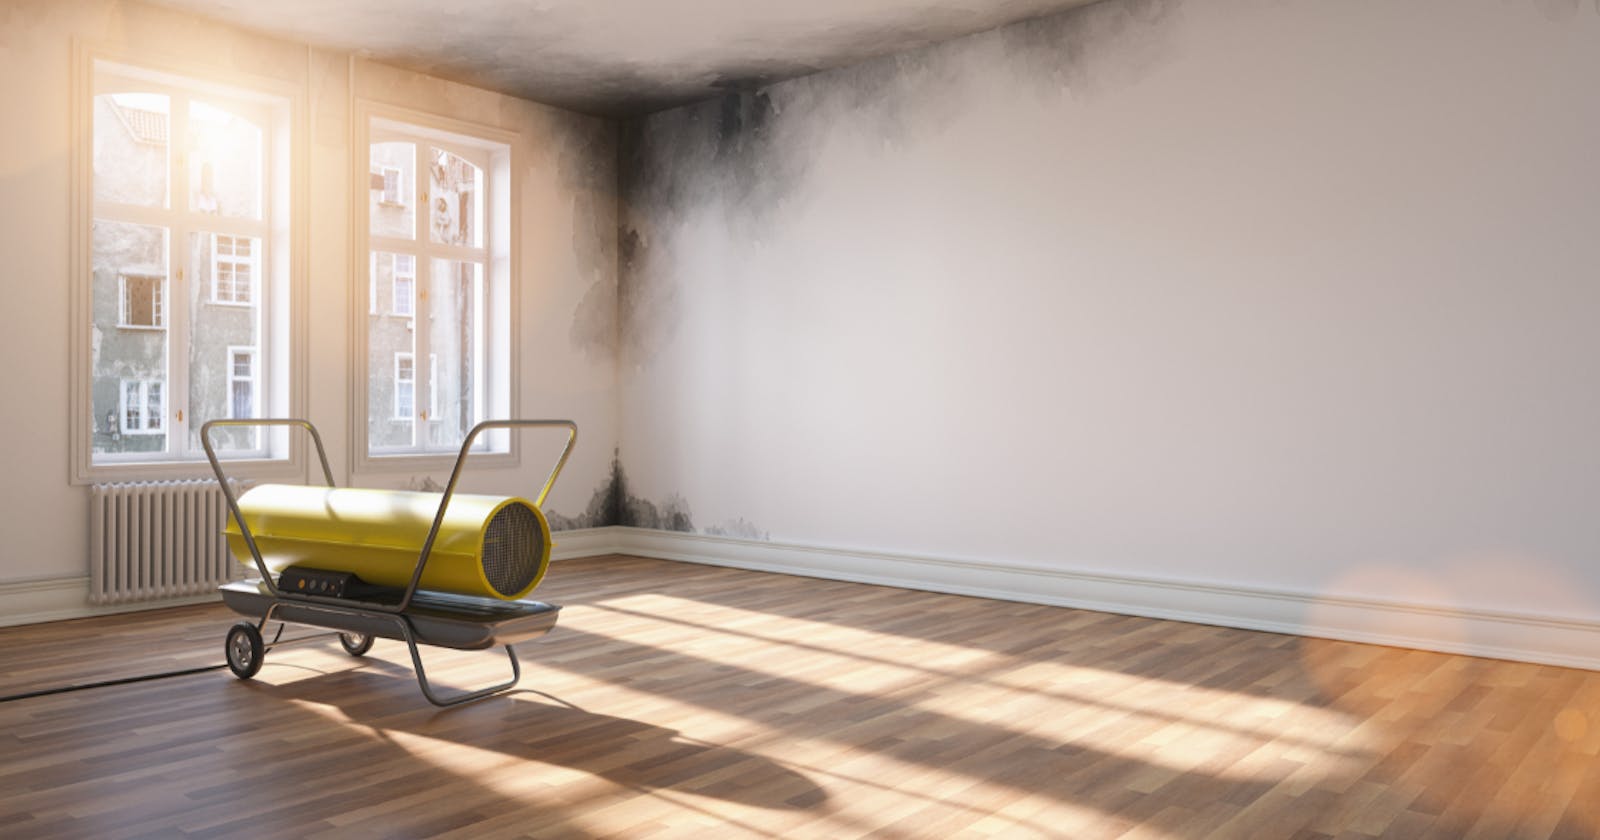 7 Signs That Indicate You Need a Dehumidifier